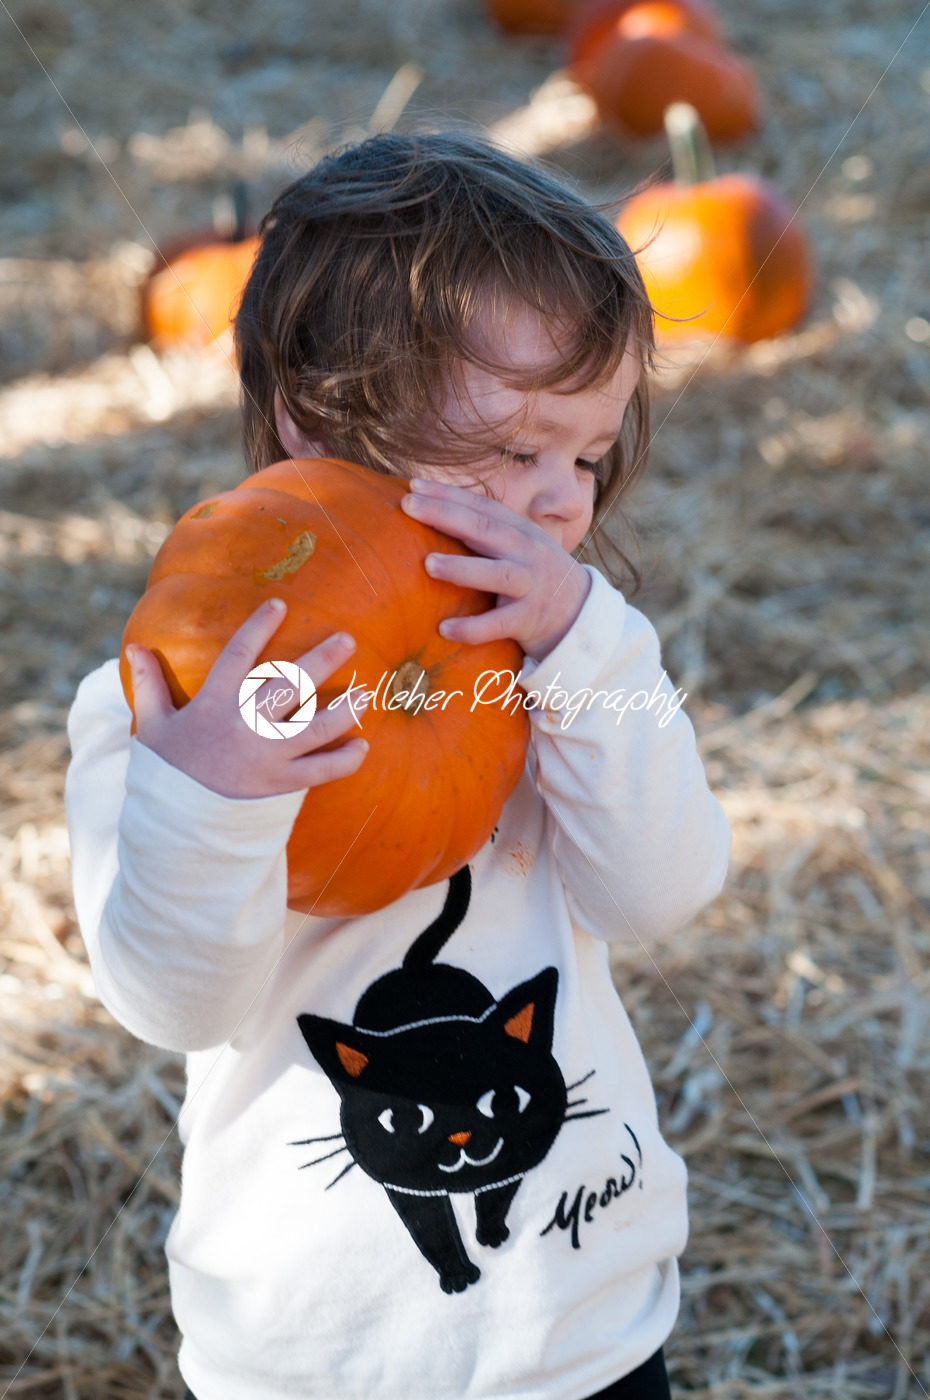 Young toddler girl outside holding a pumpkin with pumpkin fields in the background - Kelleher Photography Store